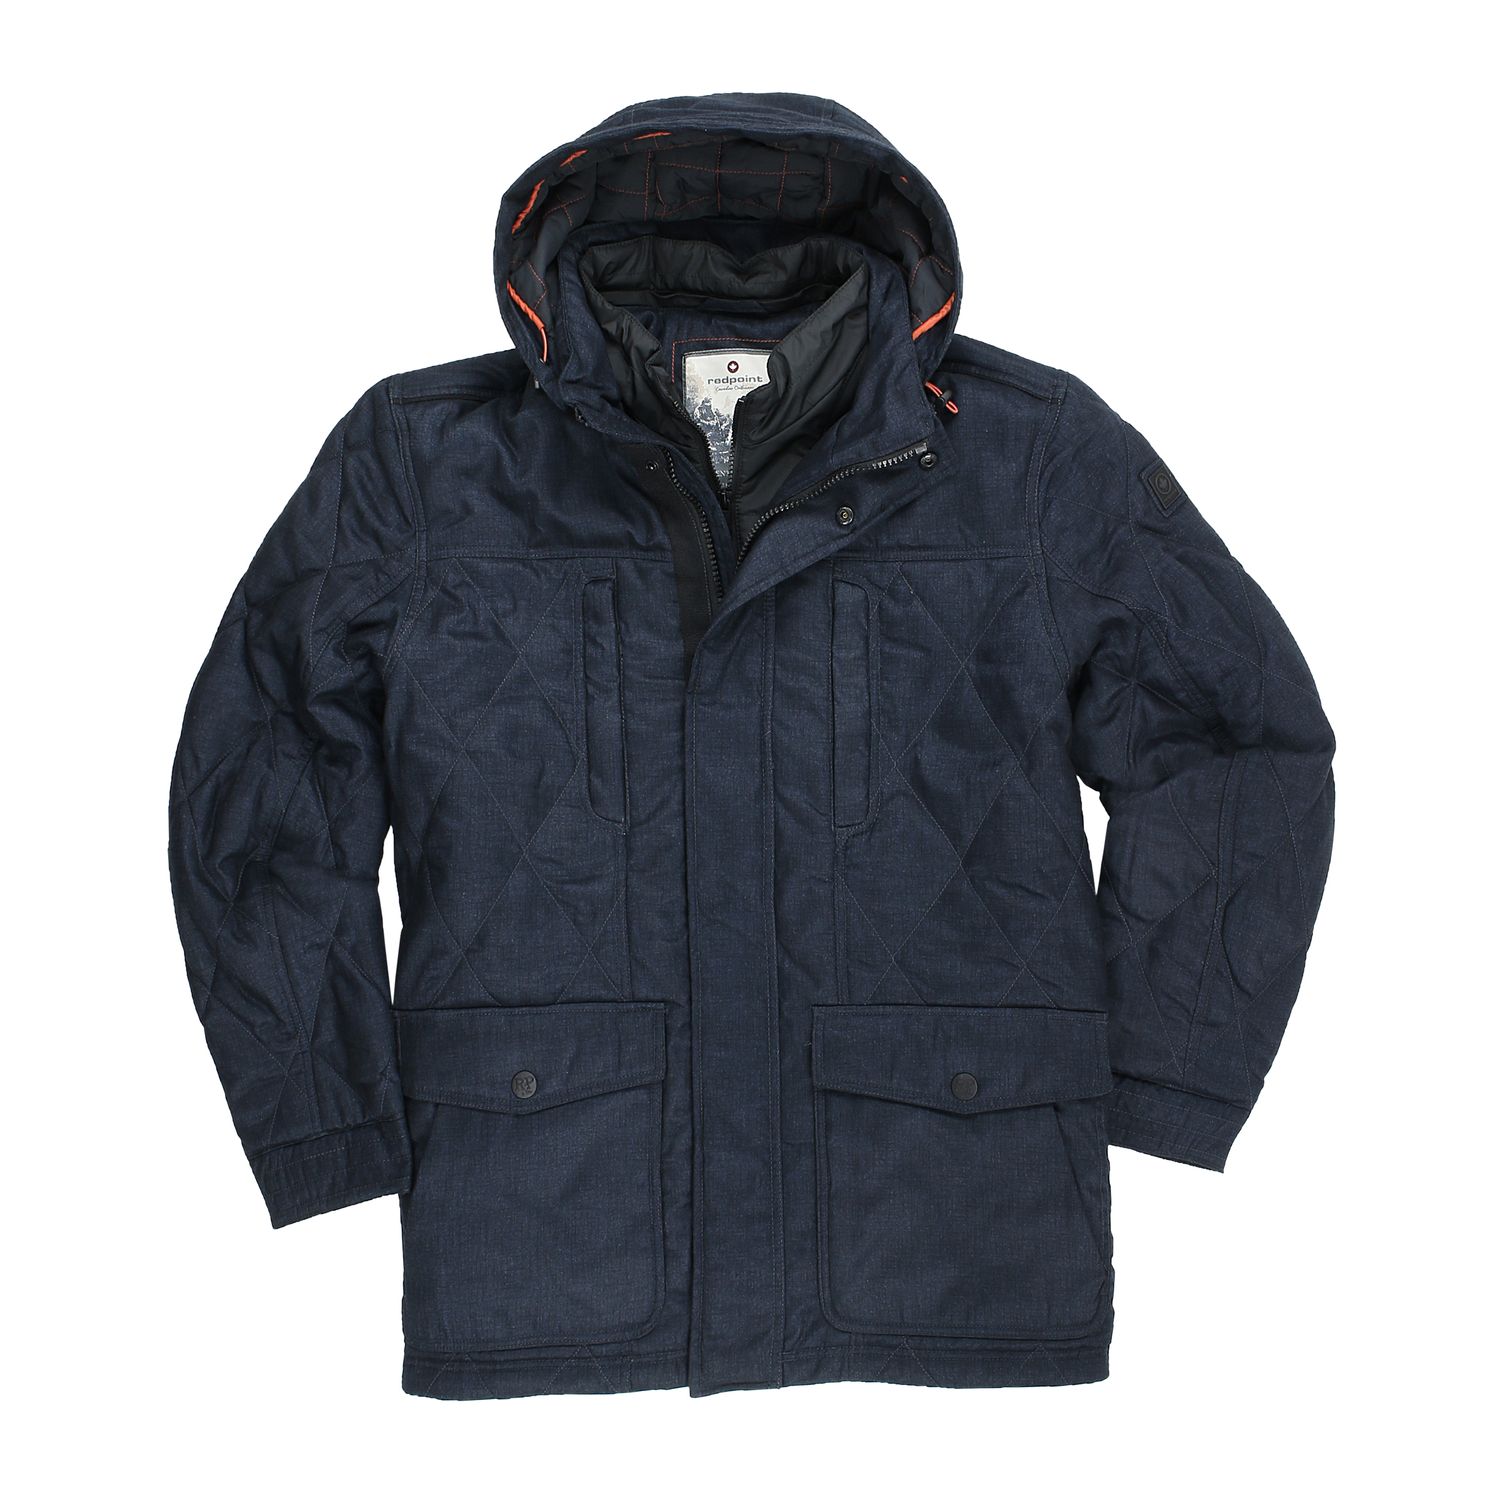 Winter jacket "Peter" in dark blue by redpoint in large sizes 58 to 70